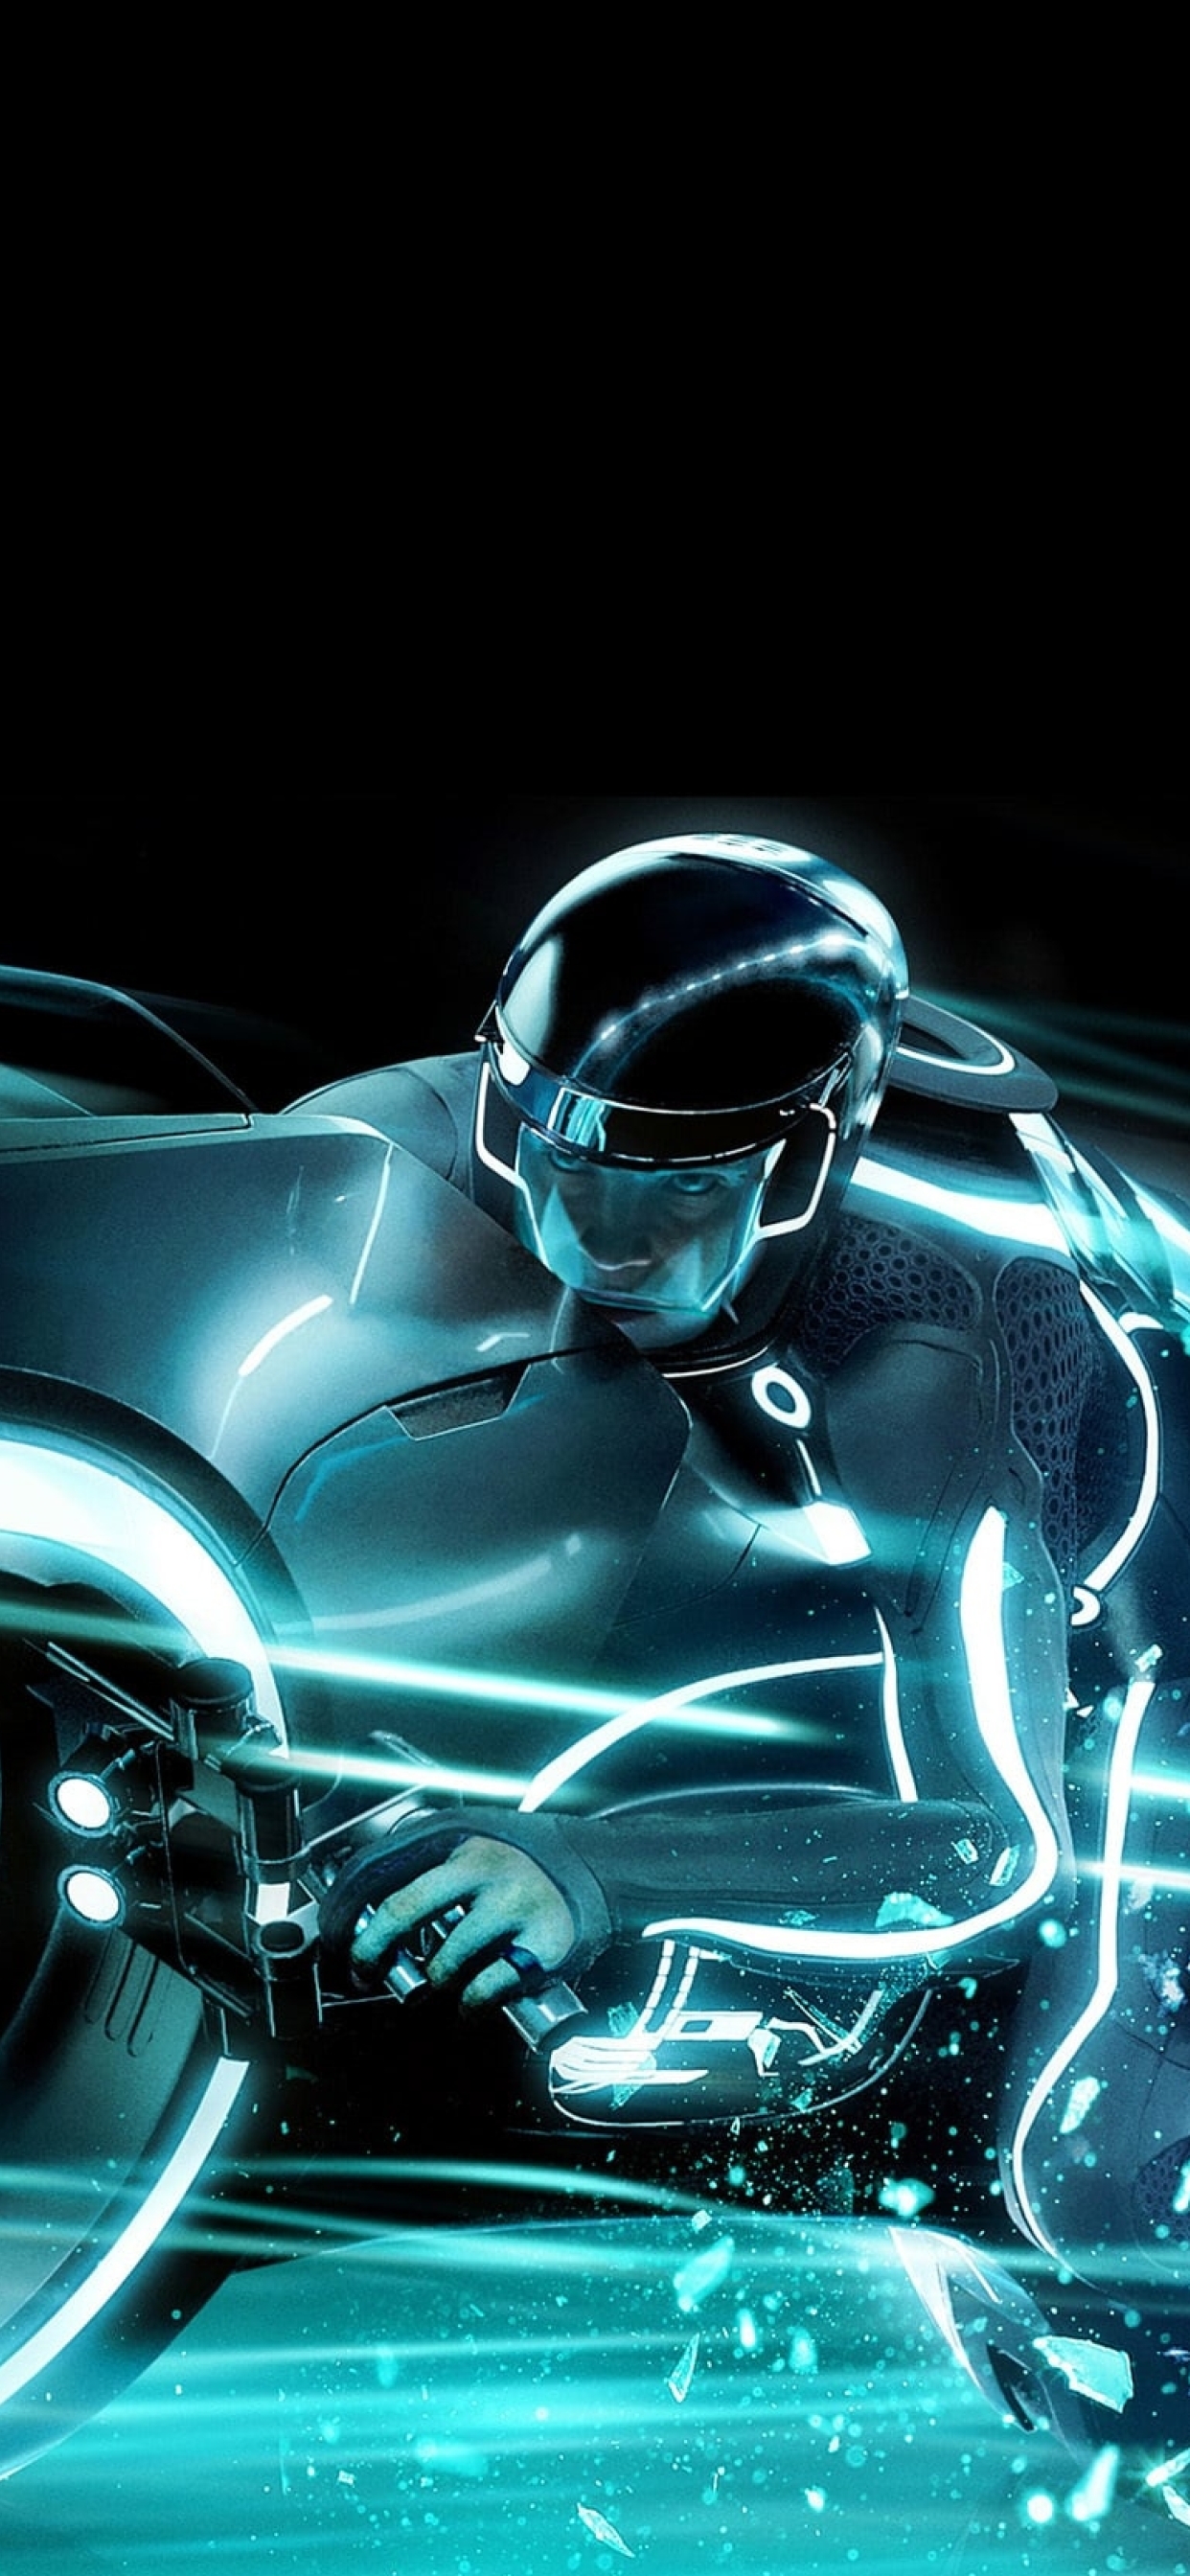 Download Tron Legacy wallpapers for mobile phone free Tron Legacy HD  pictures